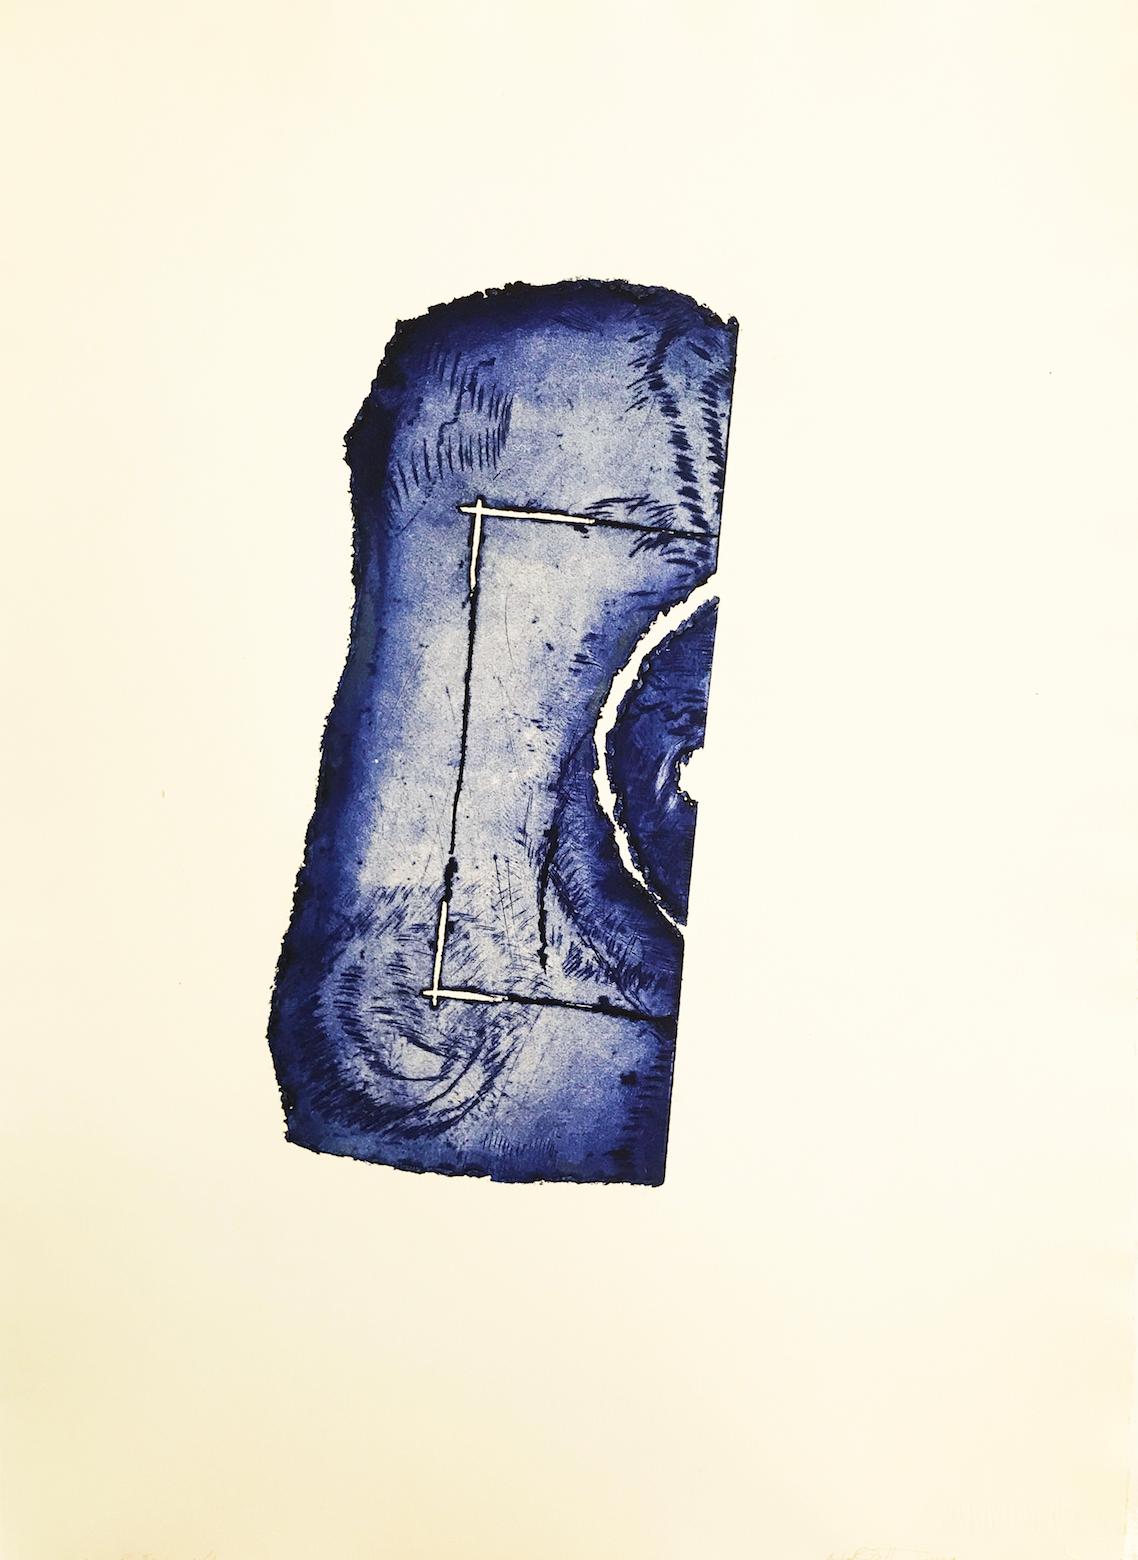 Arden Scott Abstract Print - "Square Route", ultramarine blue abstract seascape inspired engraving print.